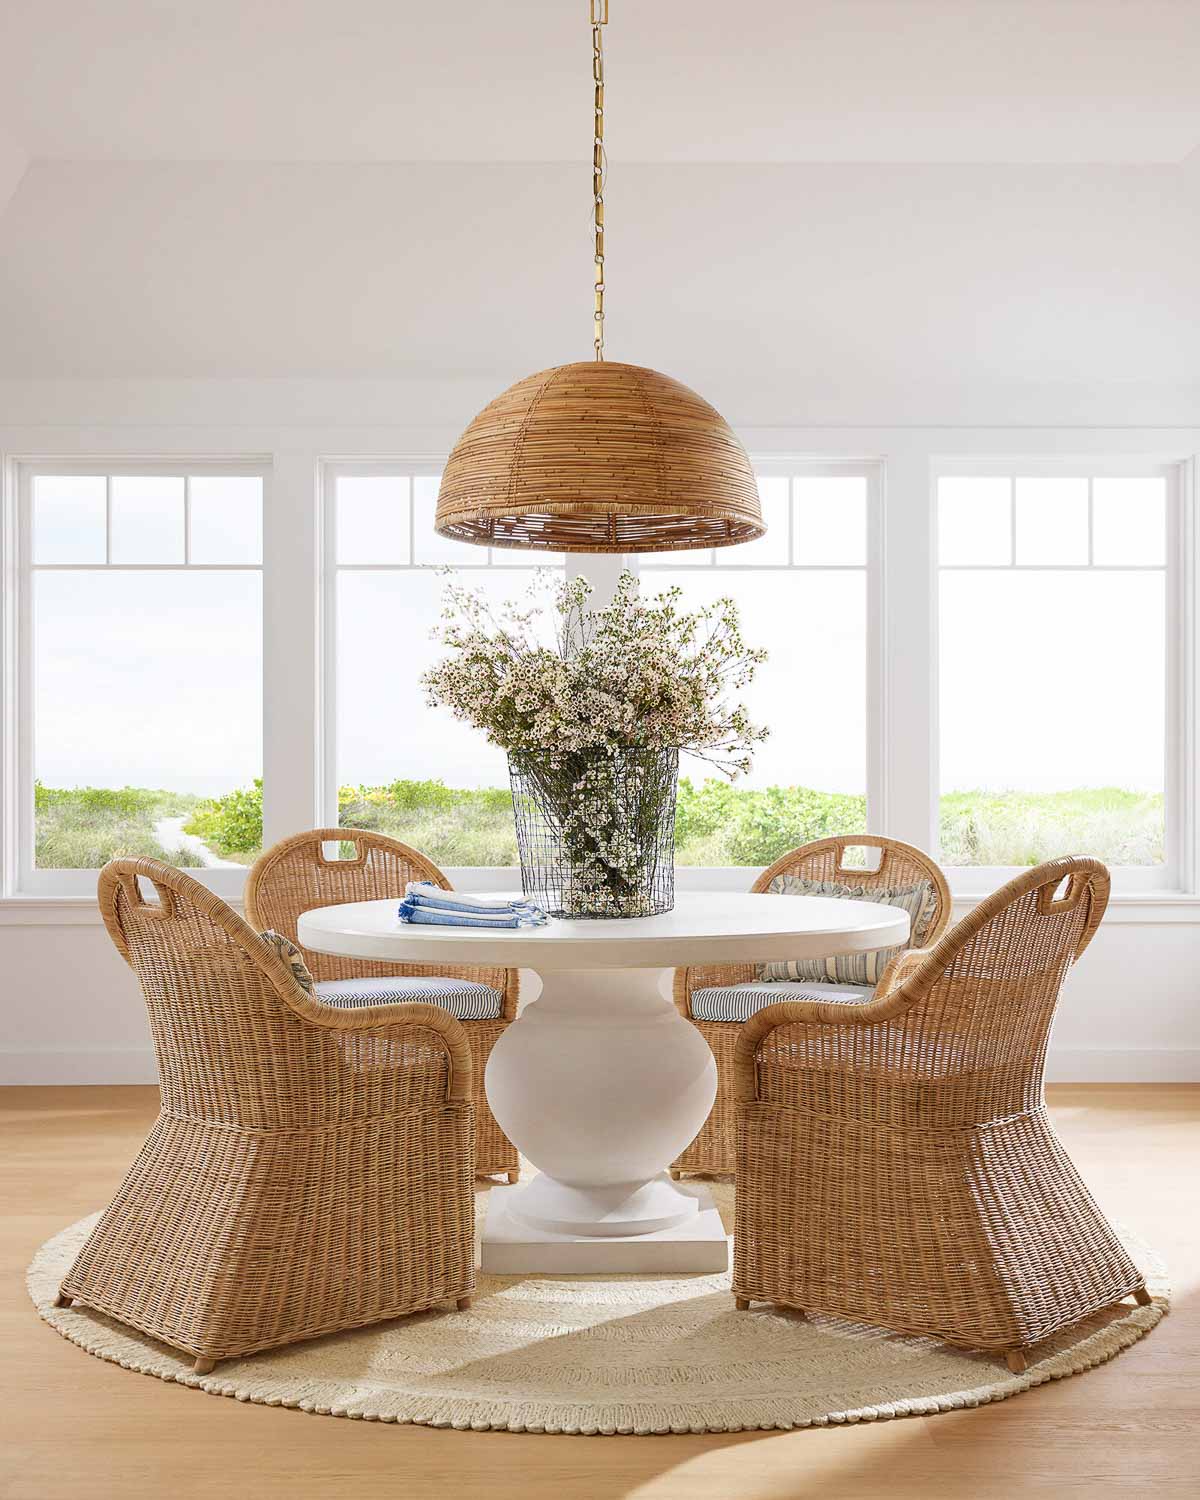 Four rattan armchairs around a round dining table